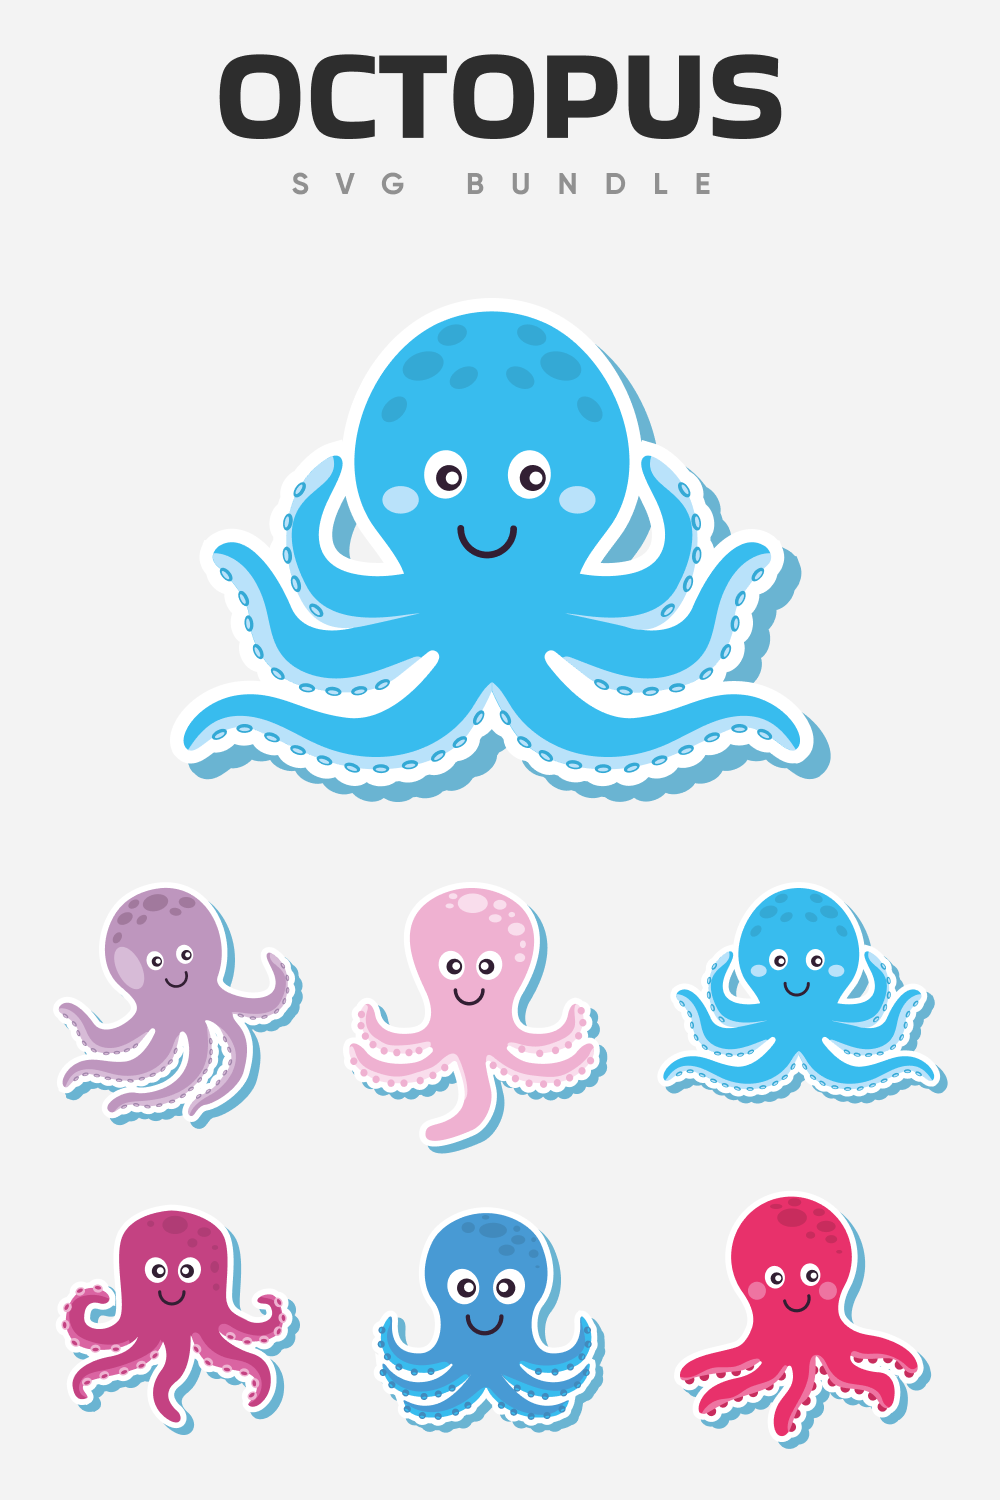 Group of octopus stickers sitting on top of each other.